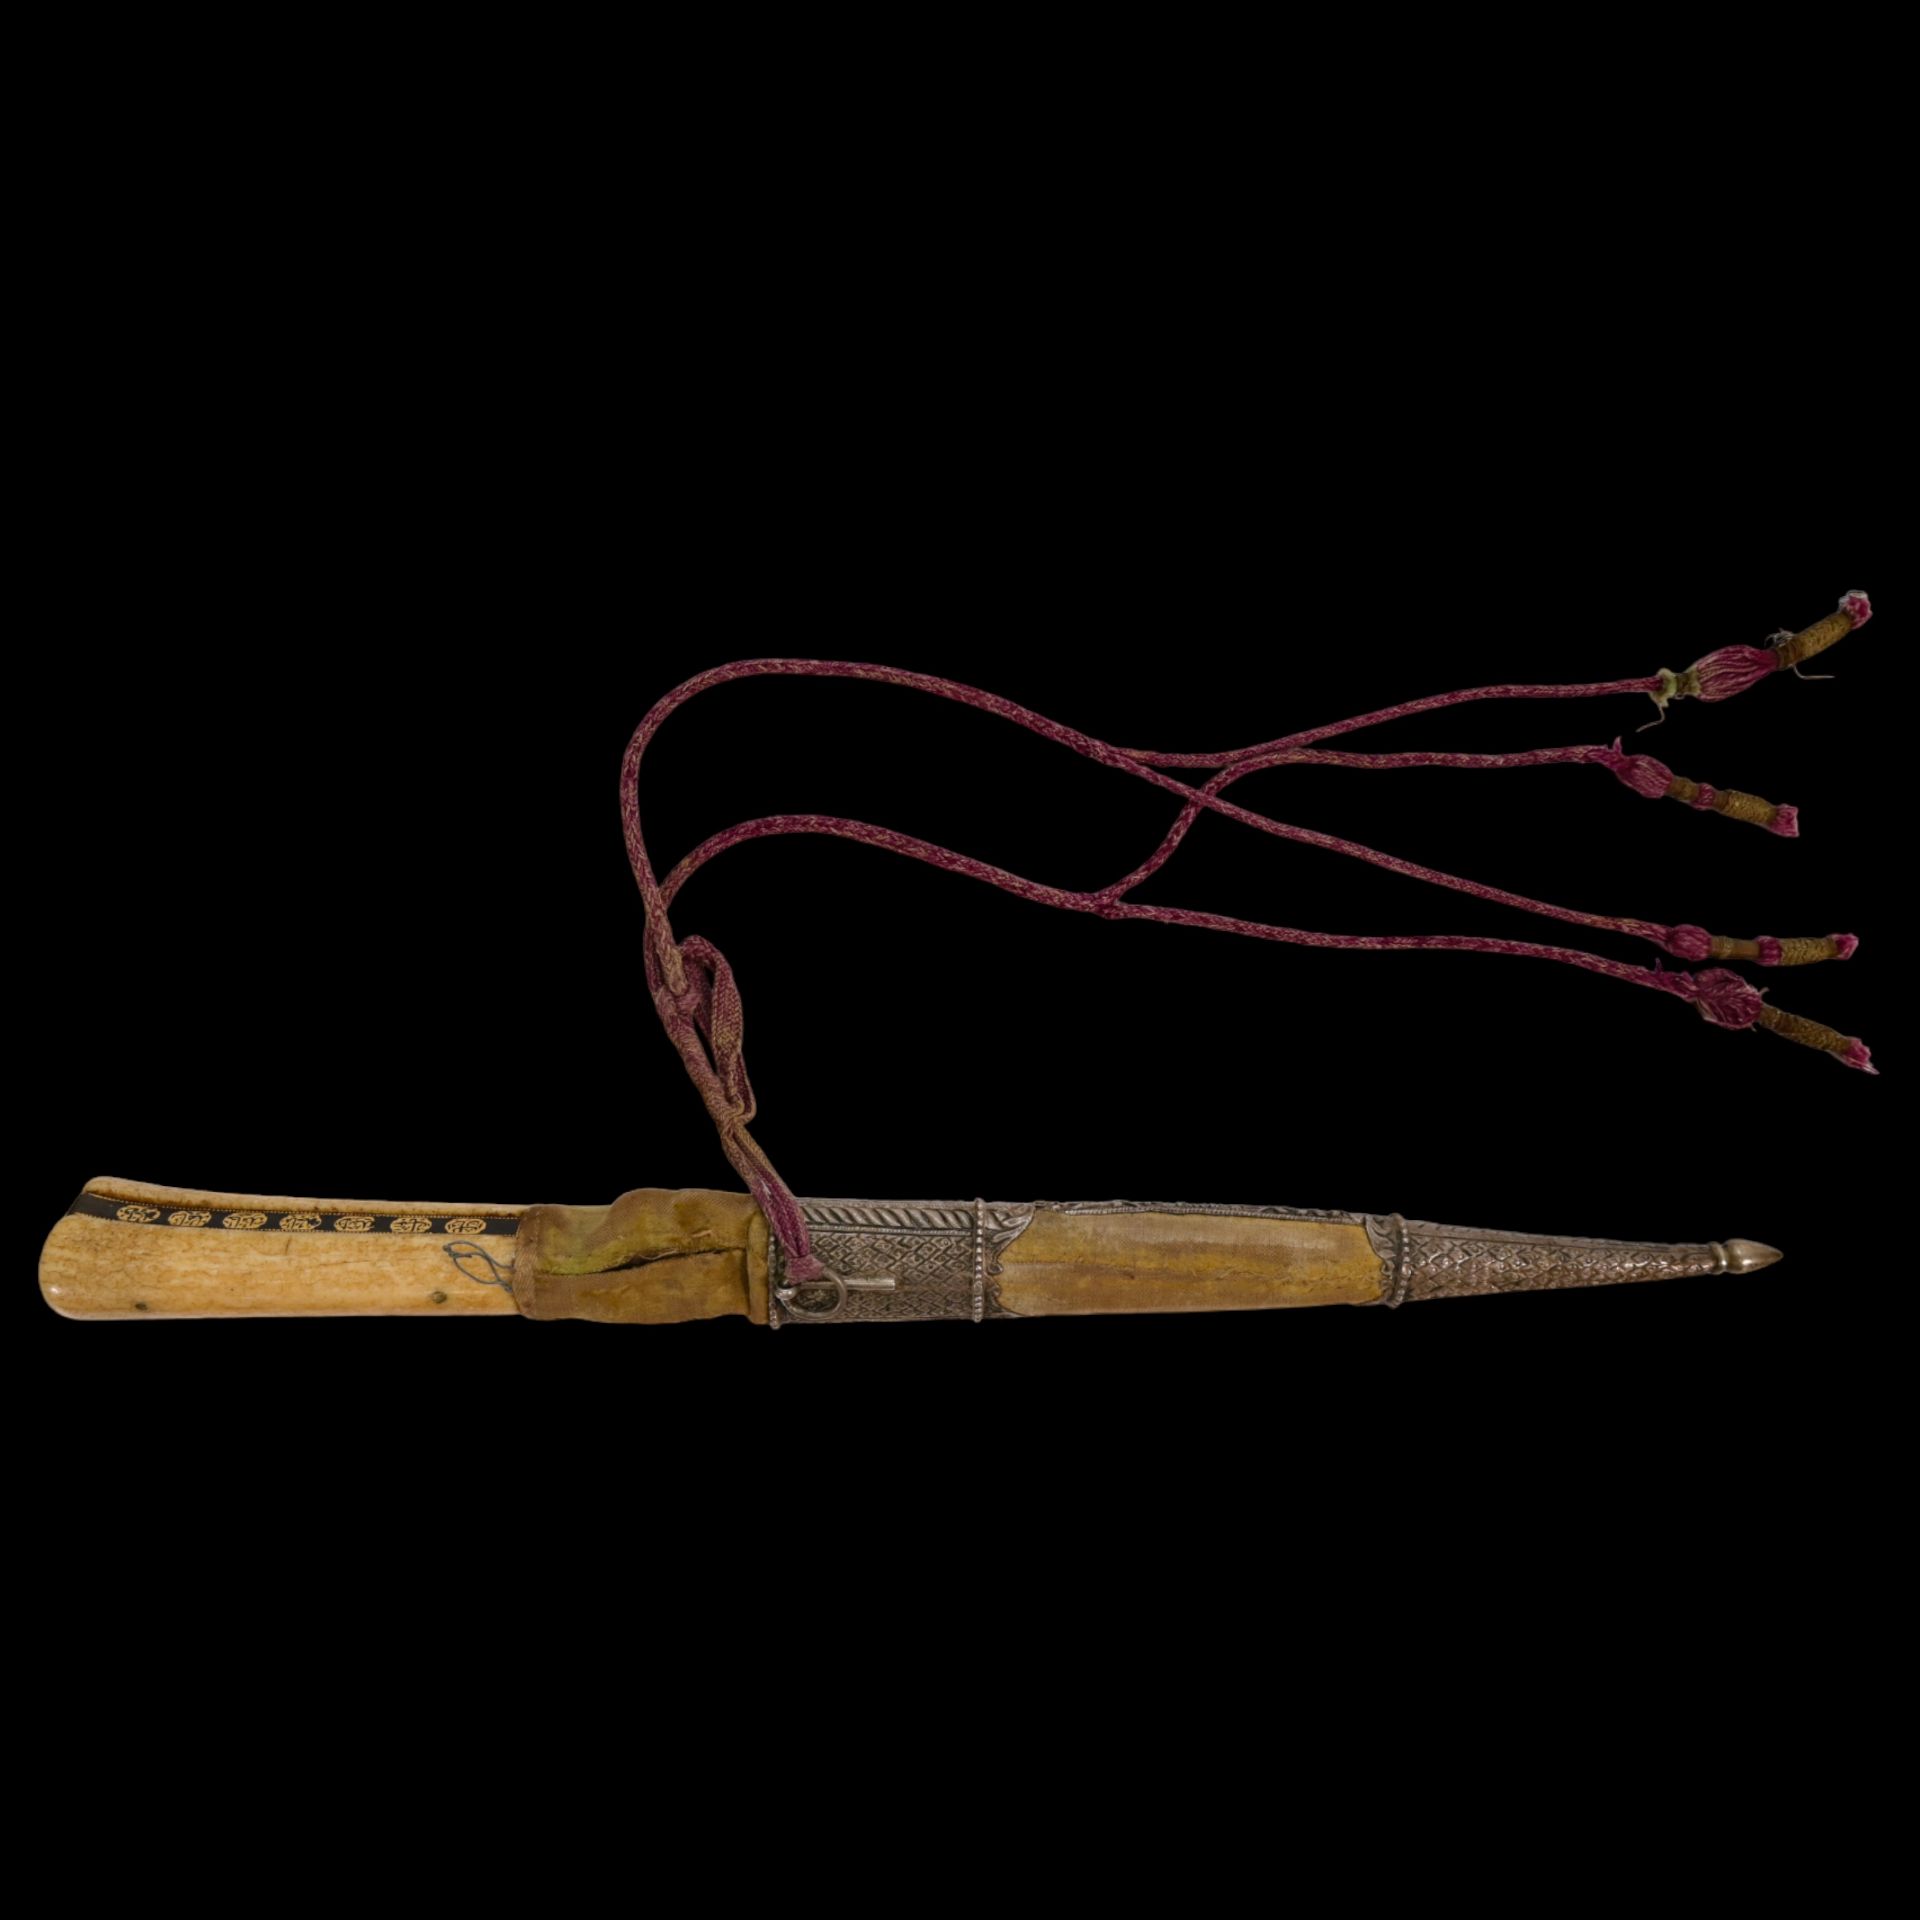 A PERSIAN ZAND DYNASTY KARD DAGGER WITH WOOTZ BLADE AND GOLD INLAY. - Image 2 of 27